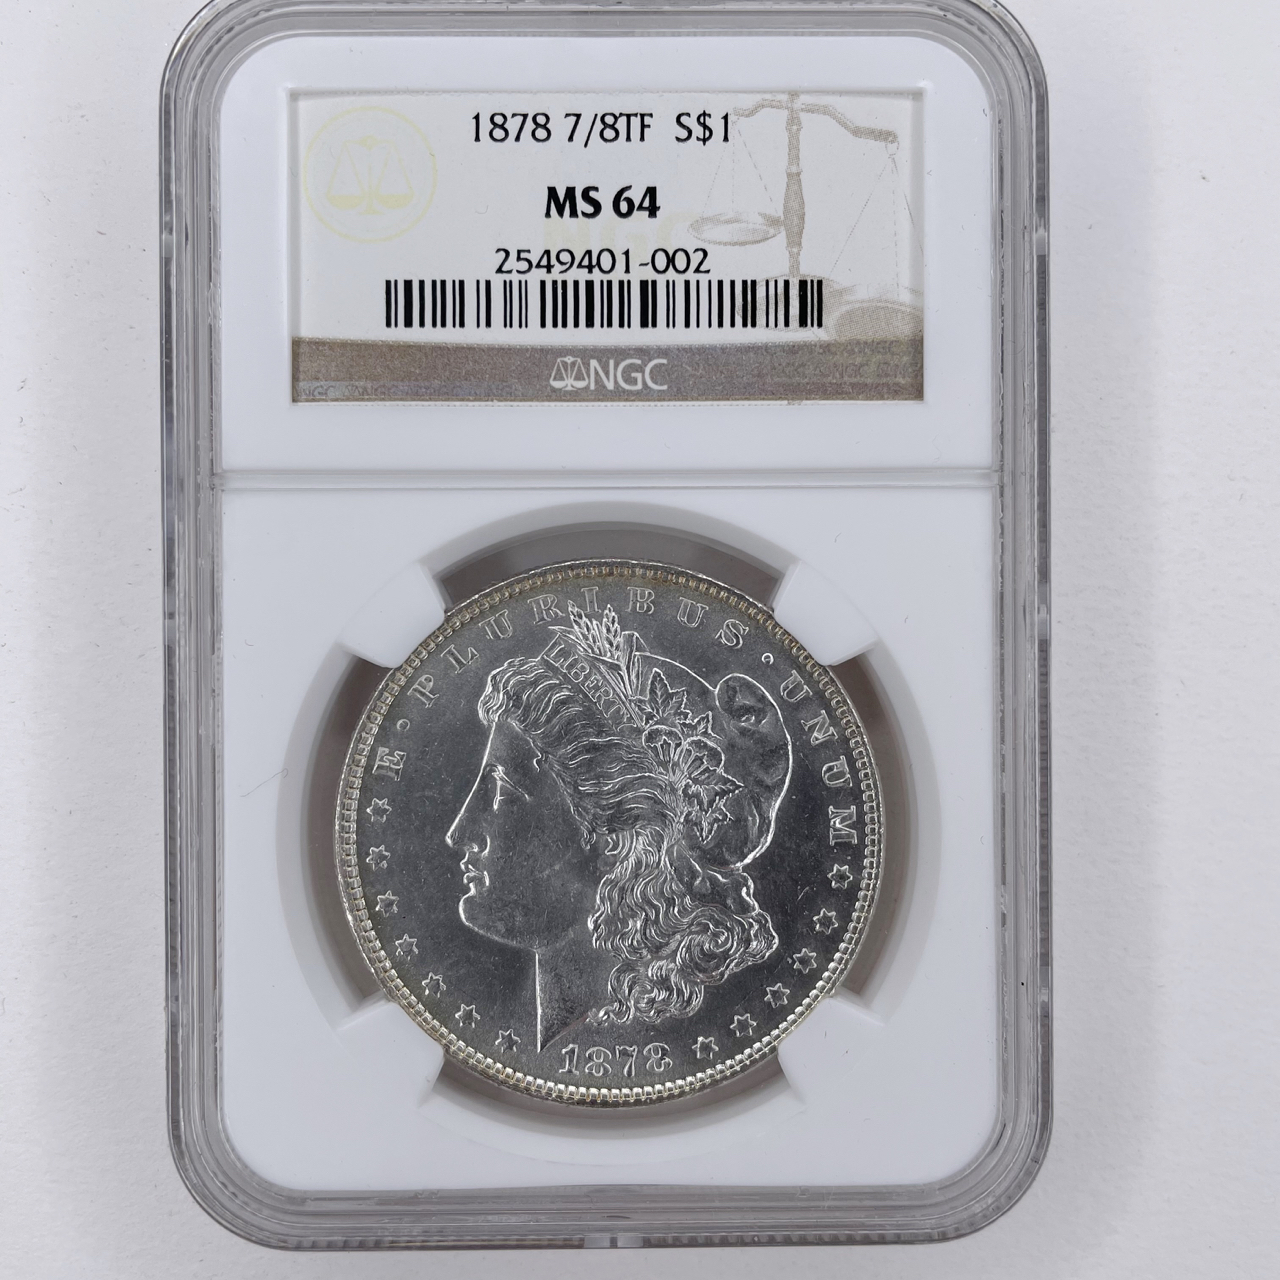 CATALOG FOR COIN AUCTION - SAT, APRIL 15 AT 10 AM